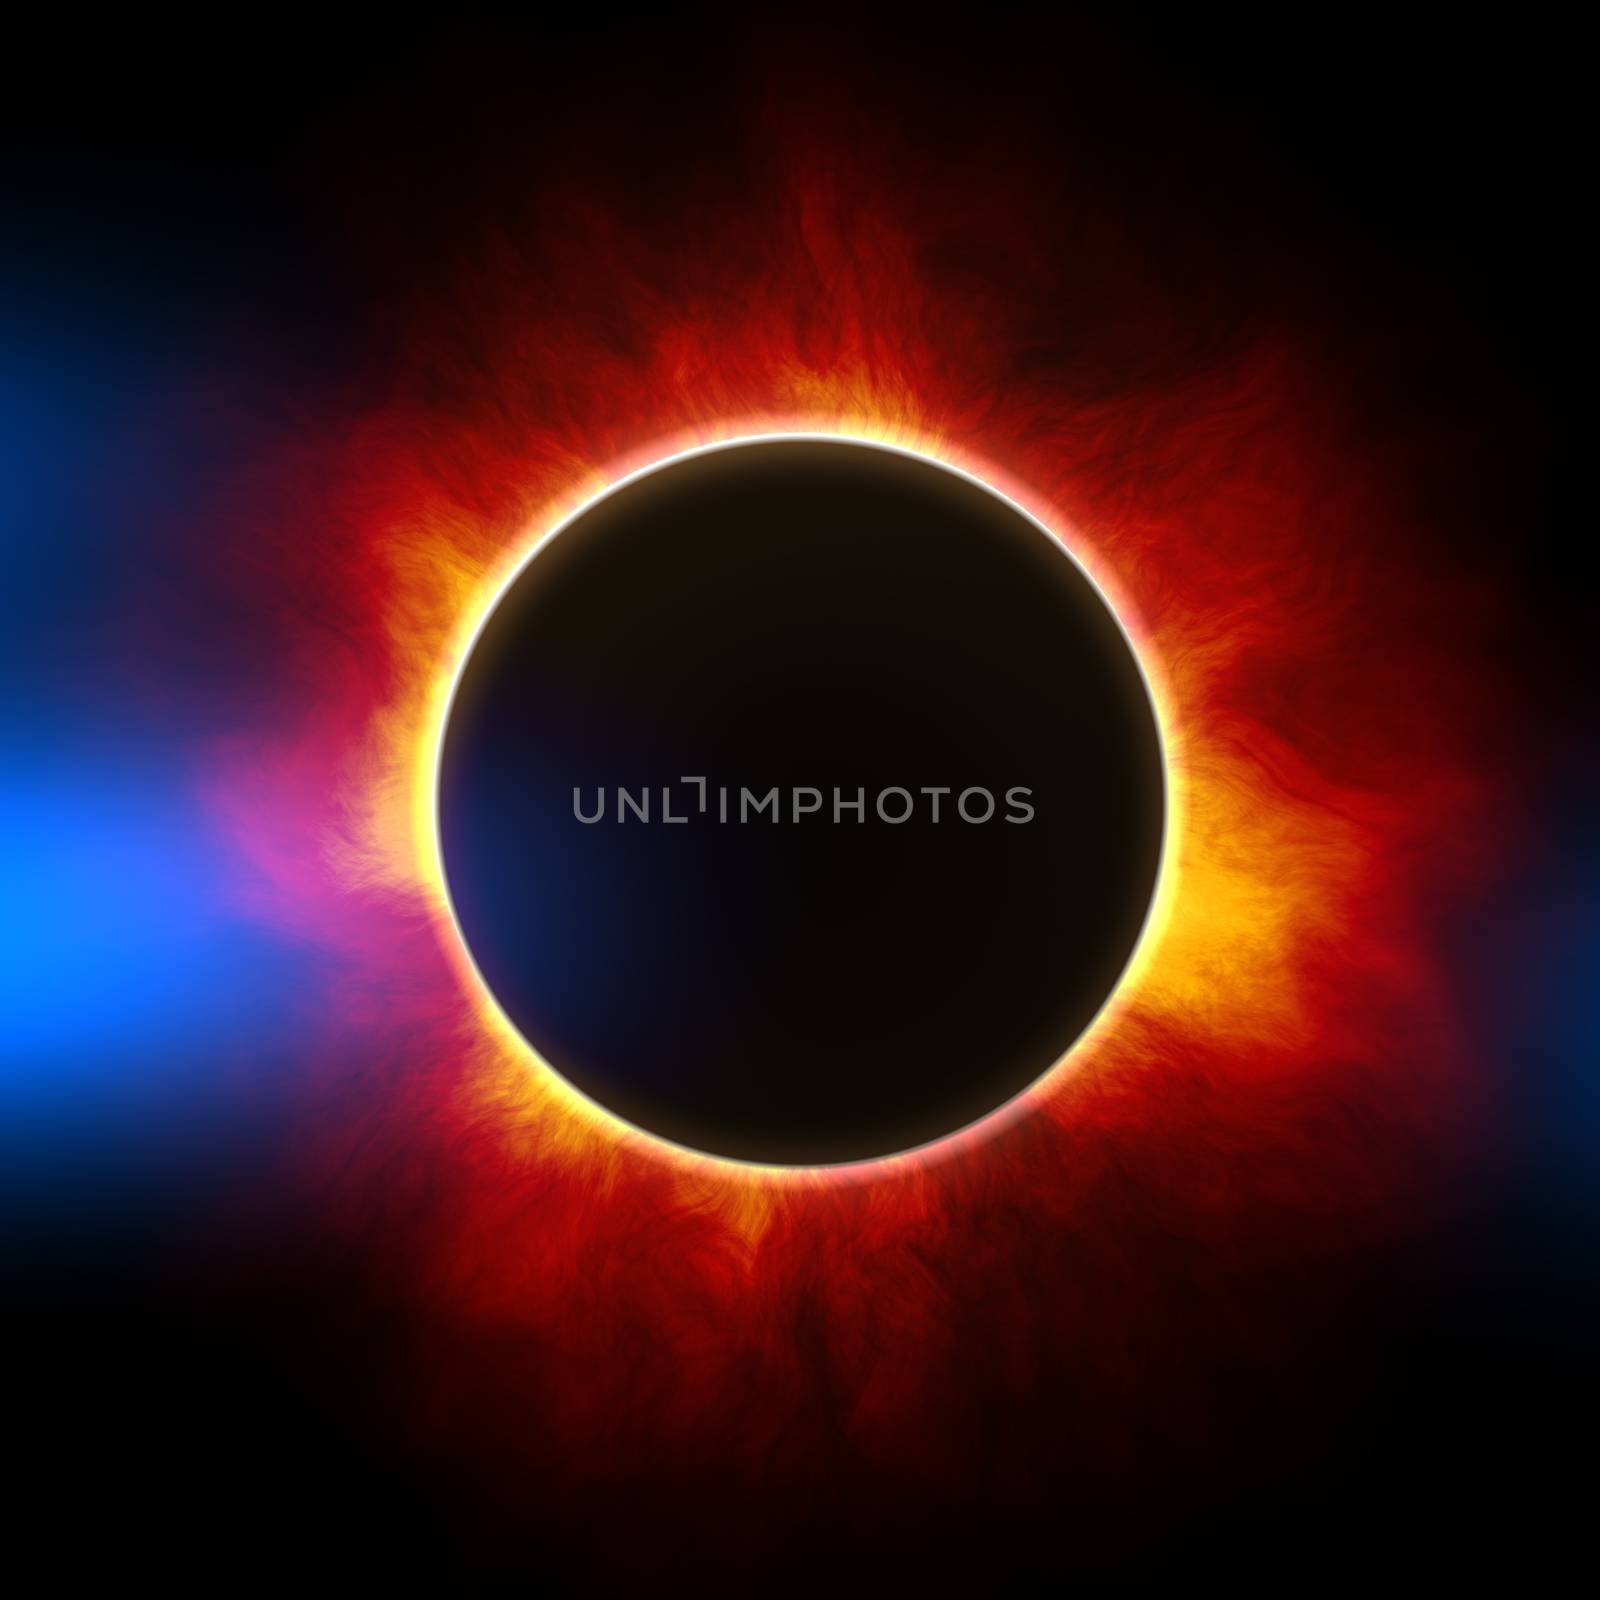 2d illustration of the beginning of a solar eclipse